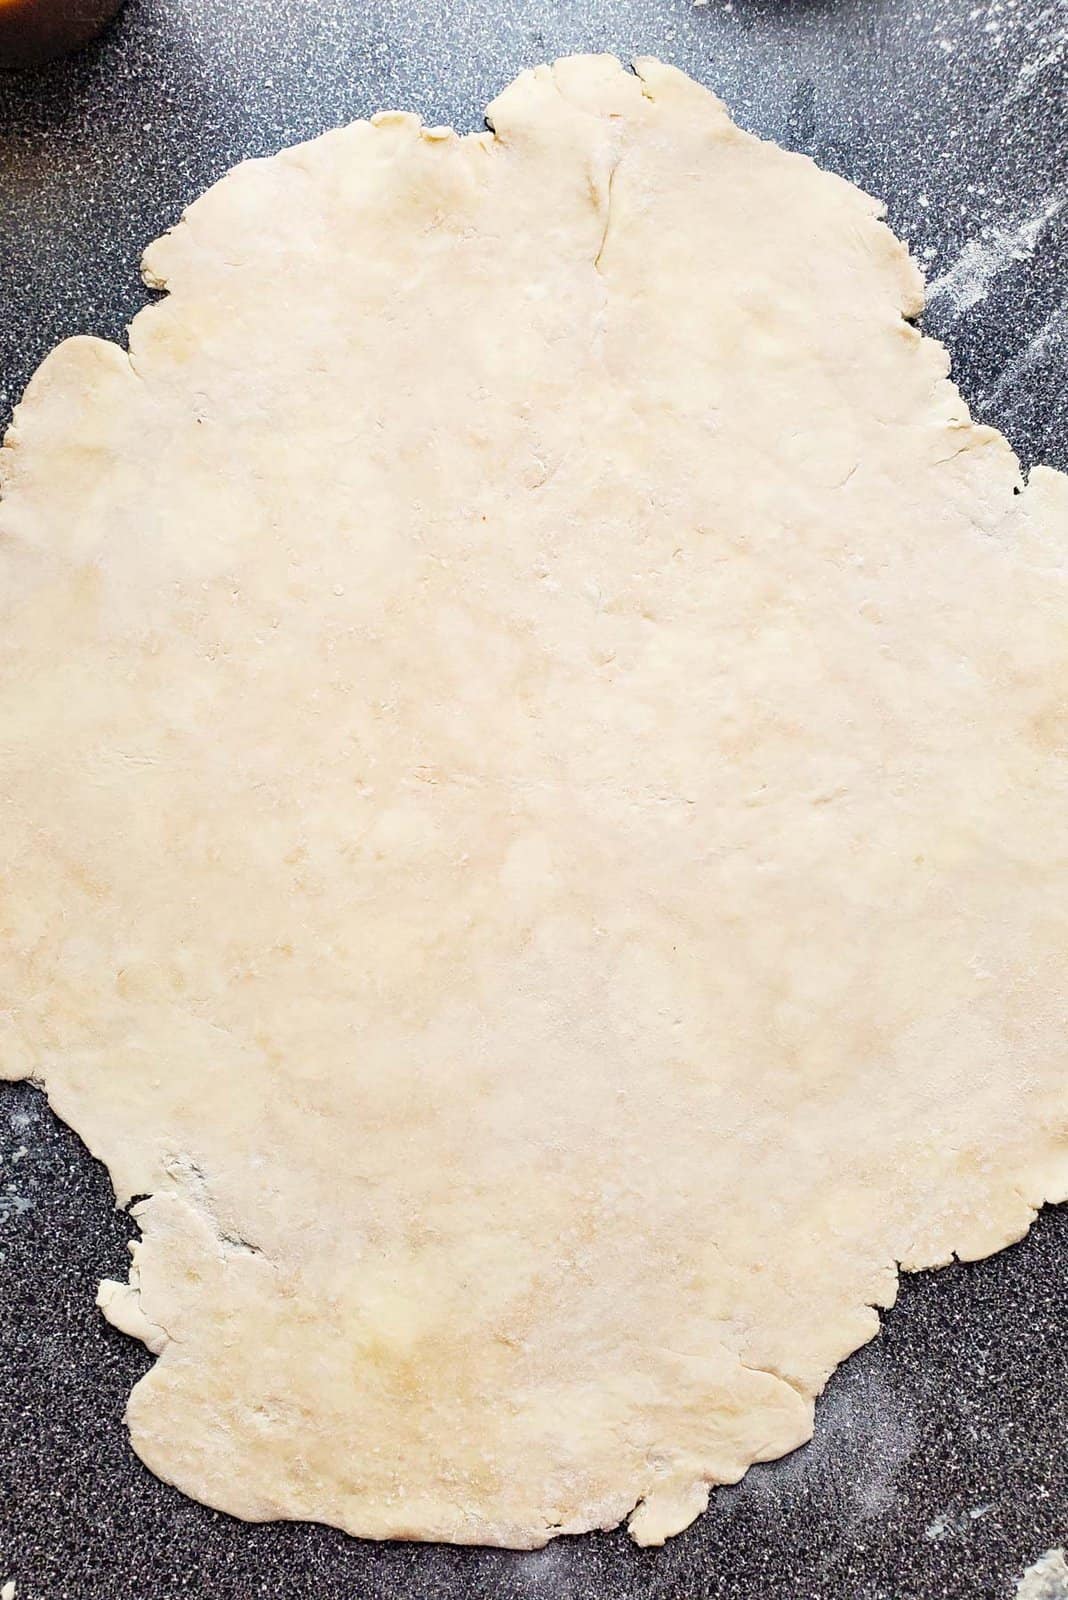 The pie crust rolled out on a work surface.